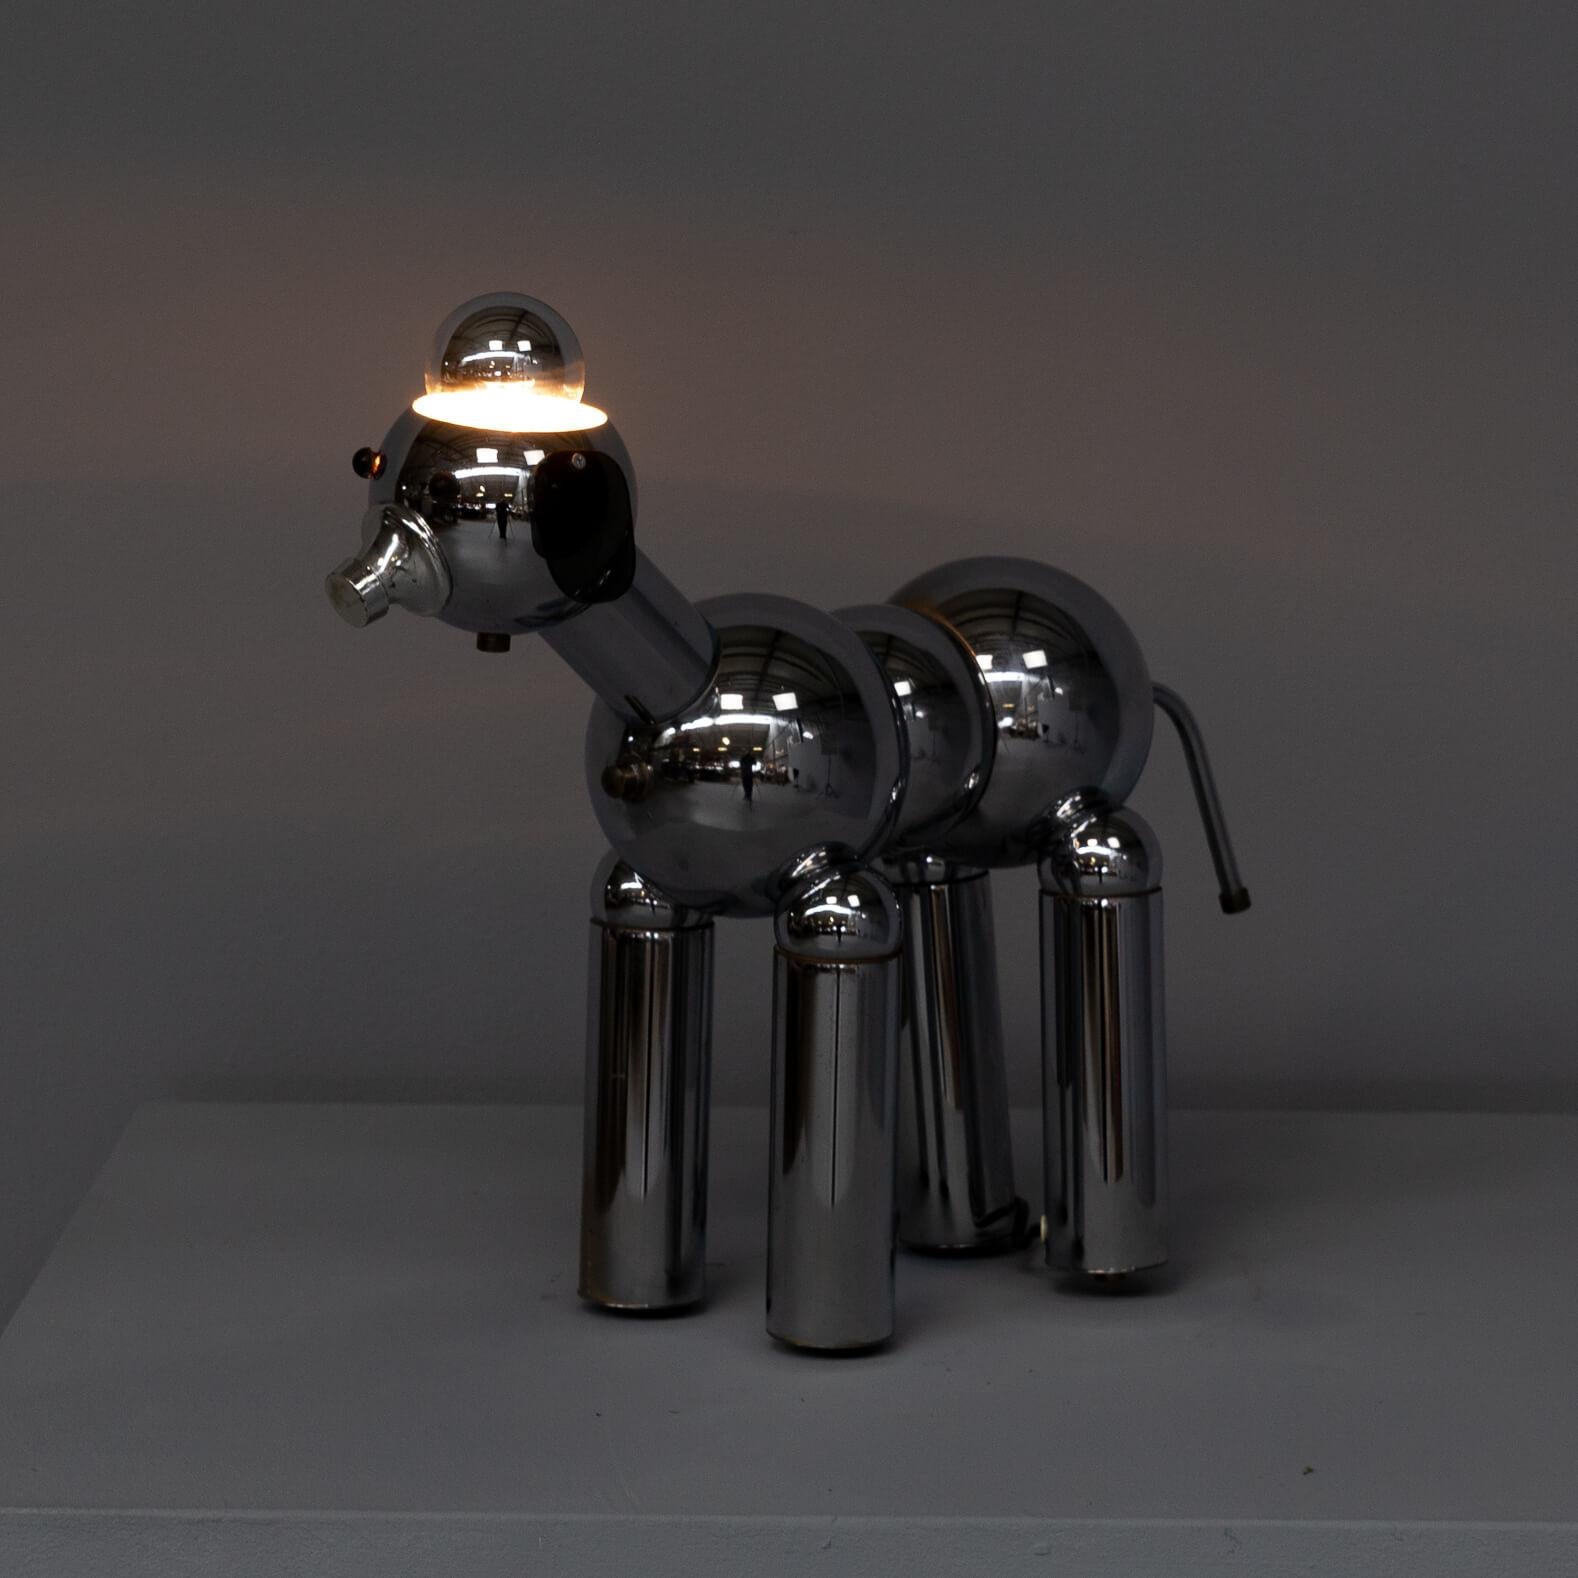 Torino Lamp Company is born from artistry expertise and later evolved in industrial reality. Only building lamps like art objects in high quality. In the range of chromed robotic lamps the firm introduced in the 1970s to the market there was and